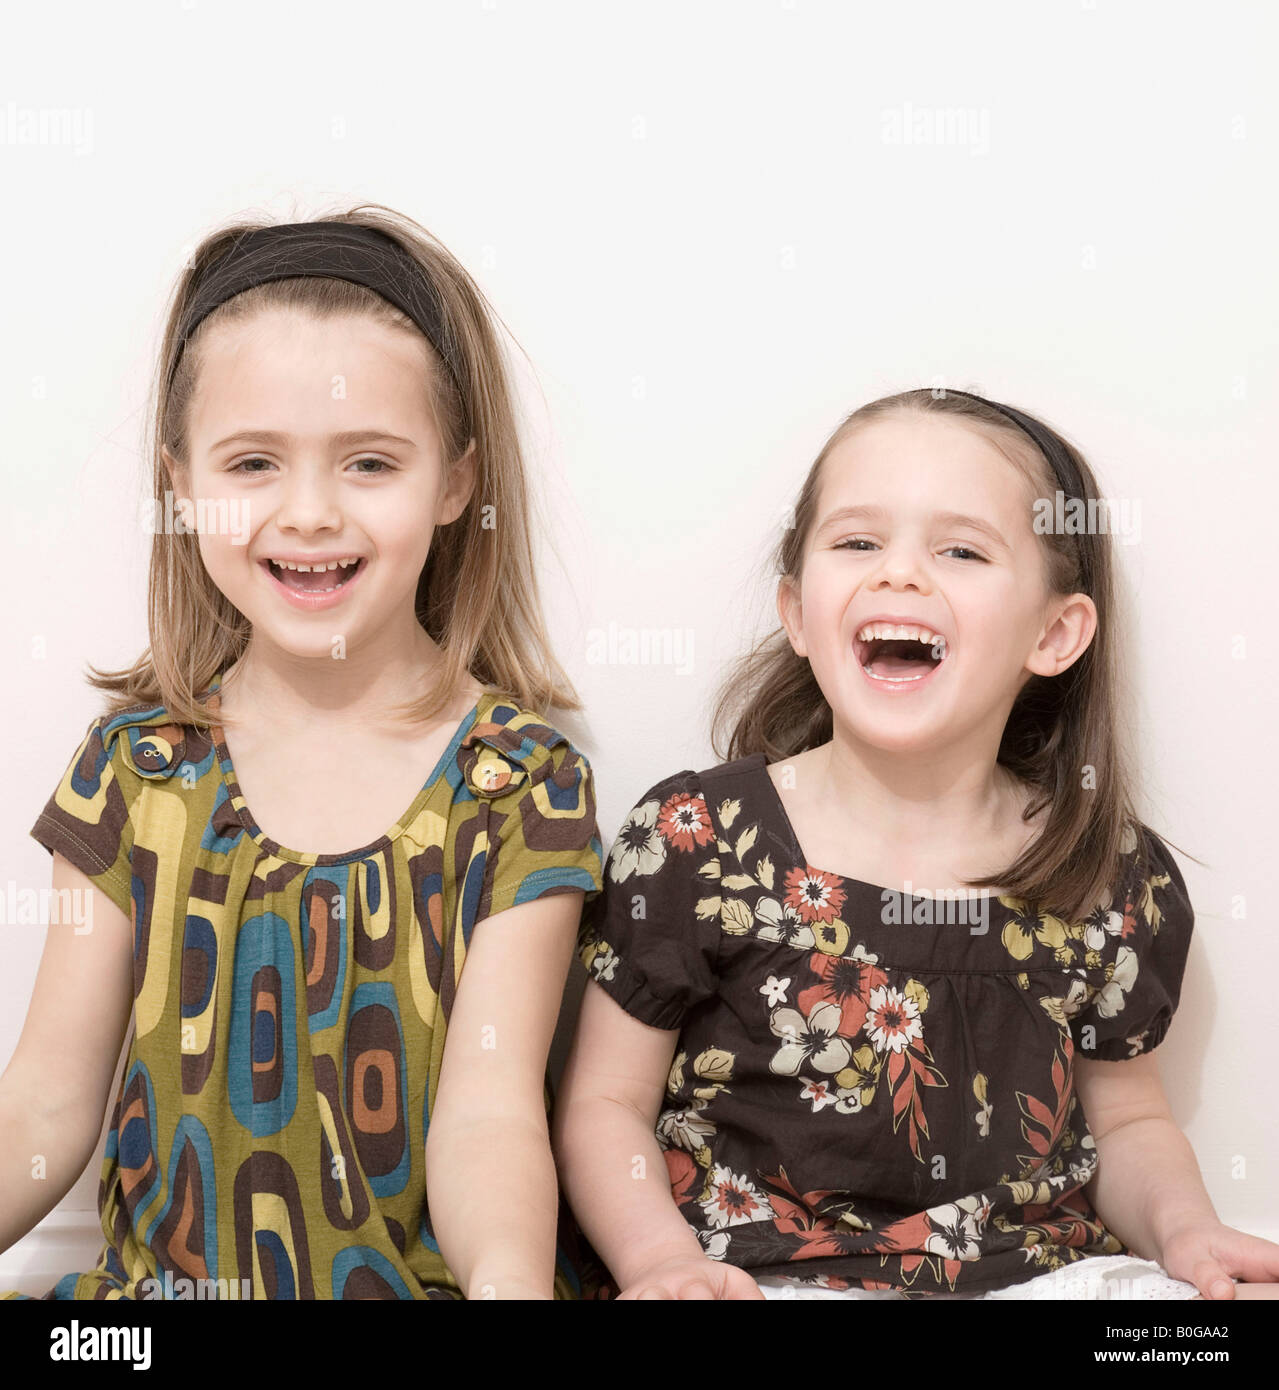 Young girls laughing Stock Photo